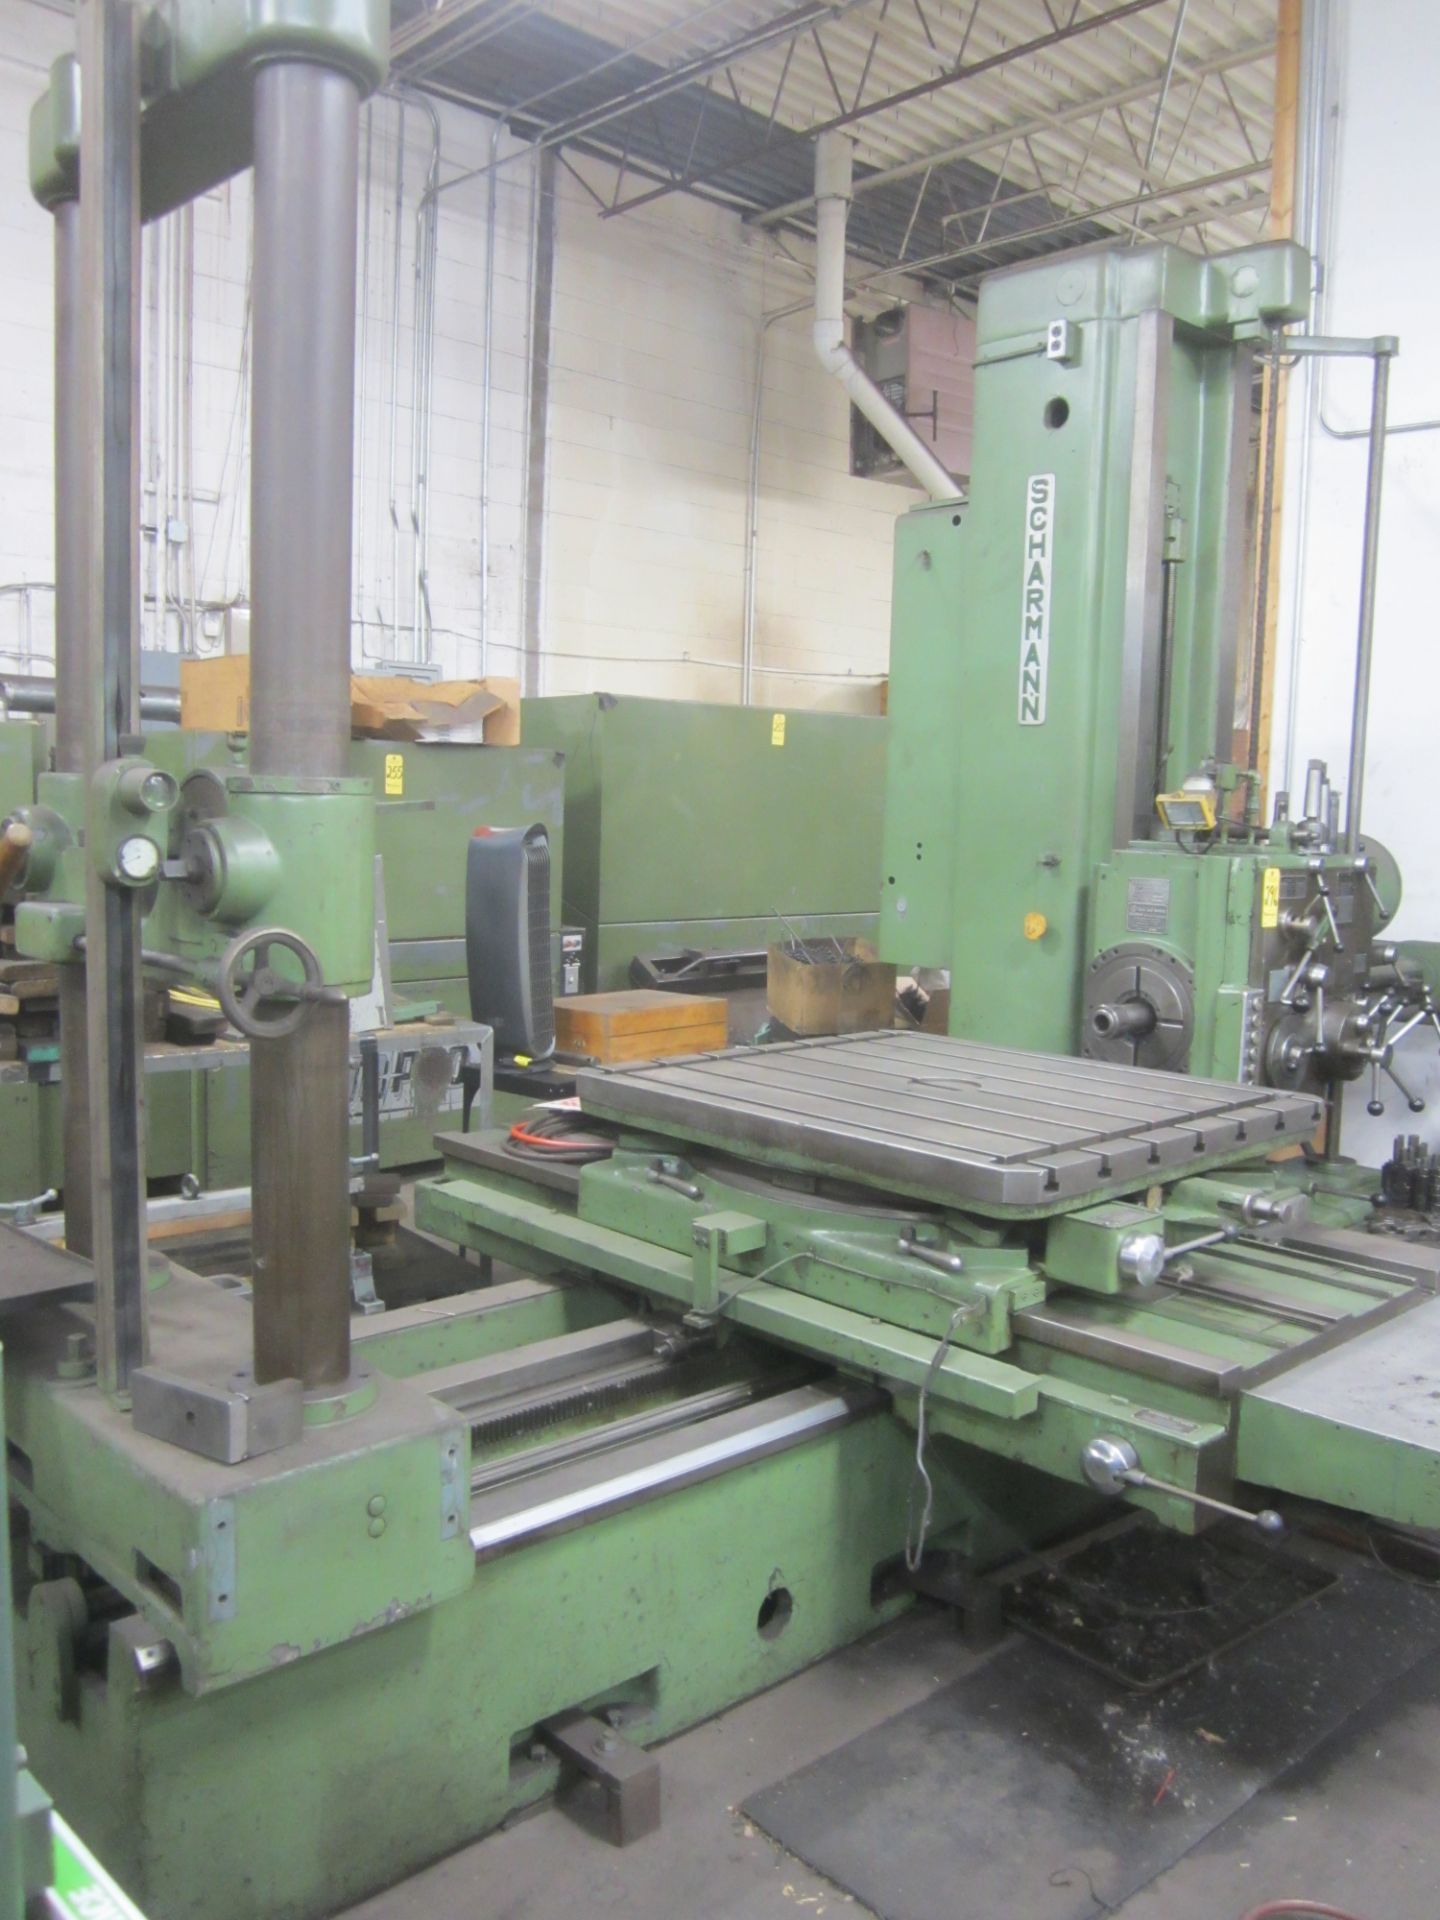 Scharmann 3" Horizontal Boring Mill, s/n 7146, 44" X 48" Power Rotary Table, Outboard Support, 51"